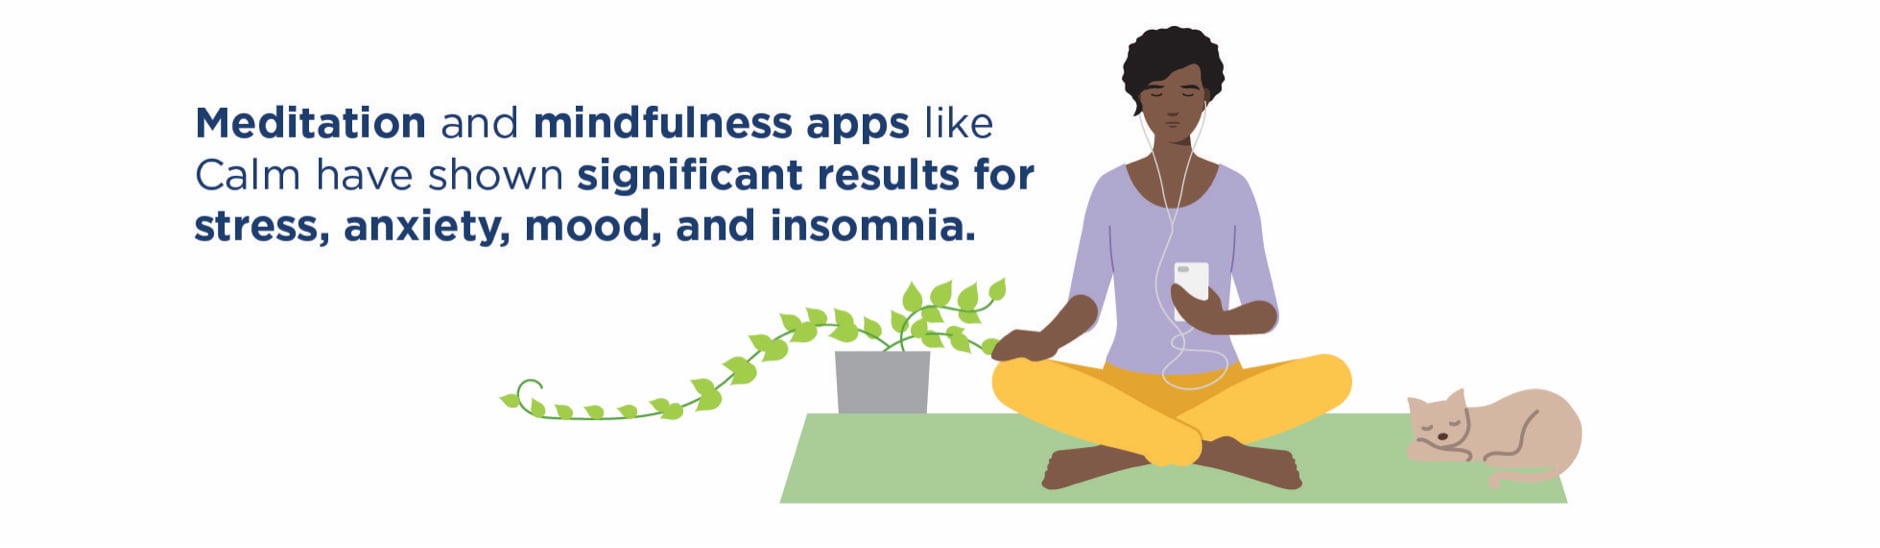 Illustration of a woman meditating with an app on a rug with caption: Meditation and mindfulness apps like Calm have shown significant results for stress, anxiety, mood, and insomnia.